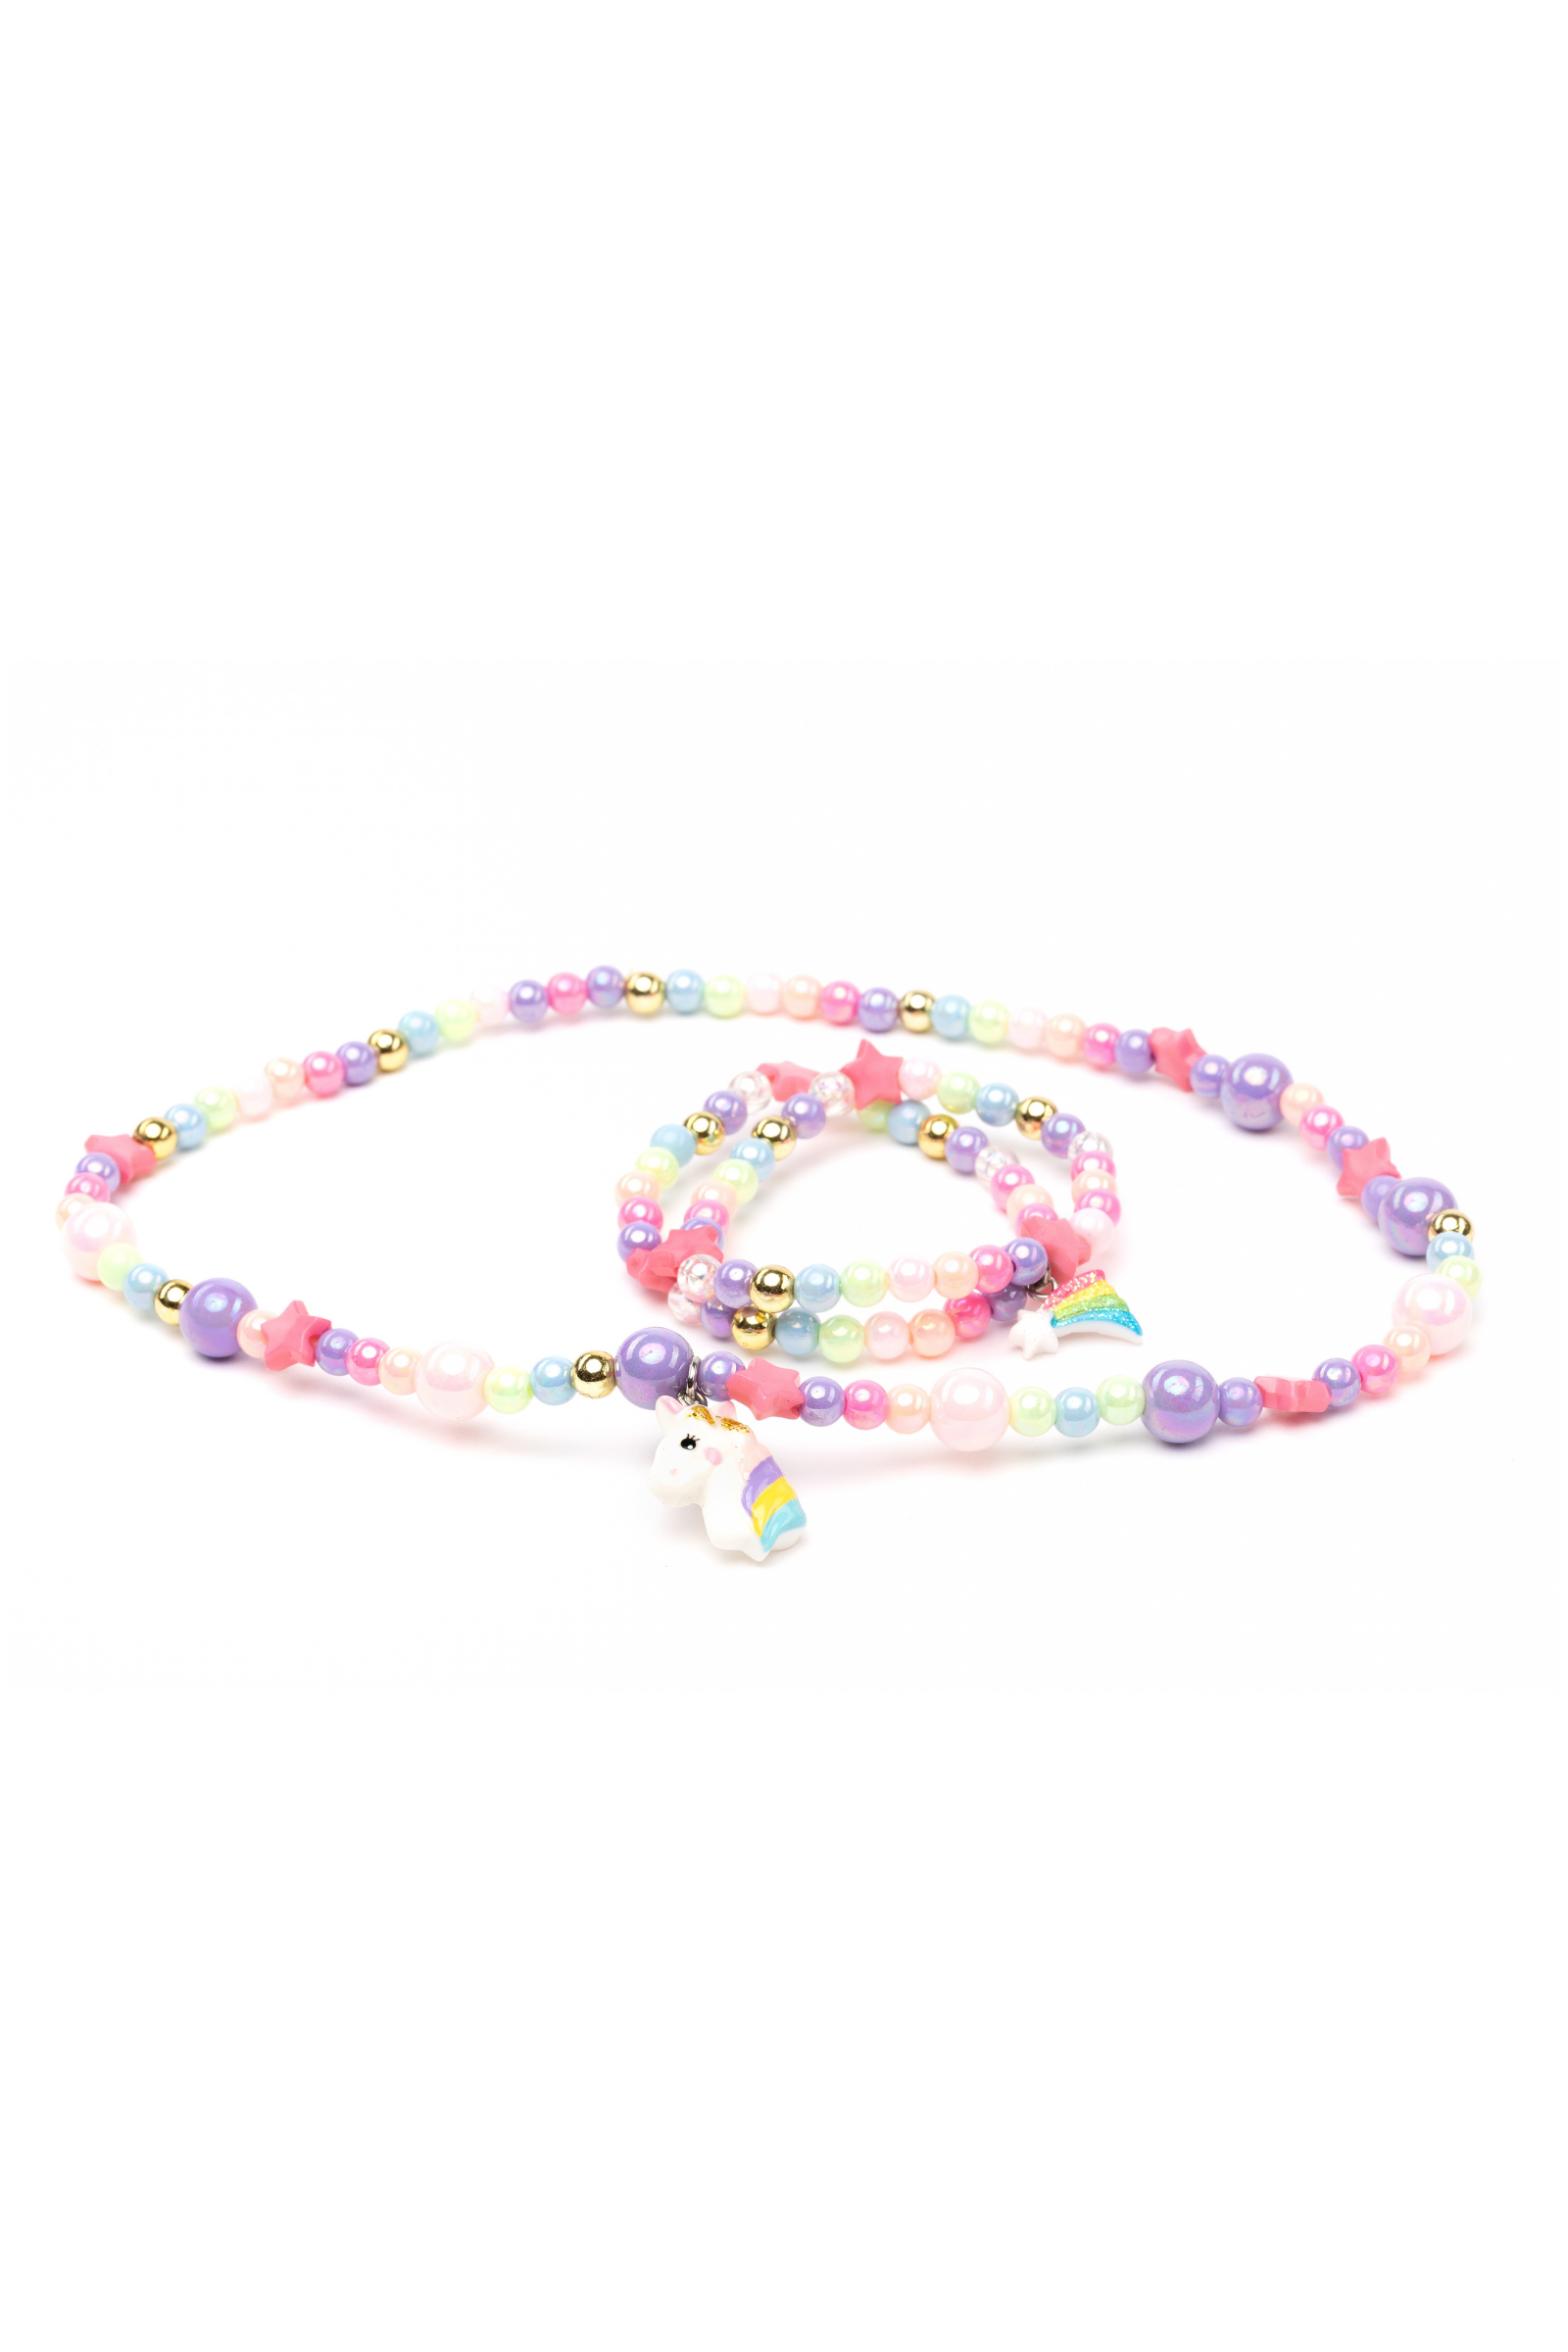 Cheerful Starry Unicorn Necklace & Bracelet by Great Pretenders #86133